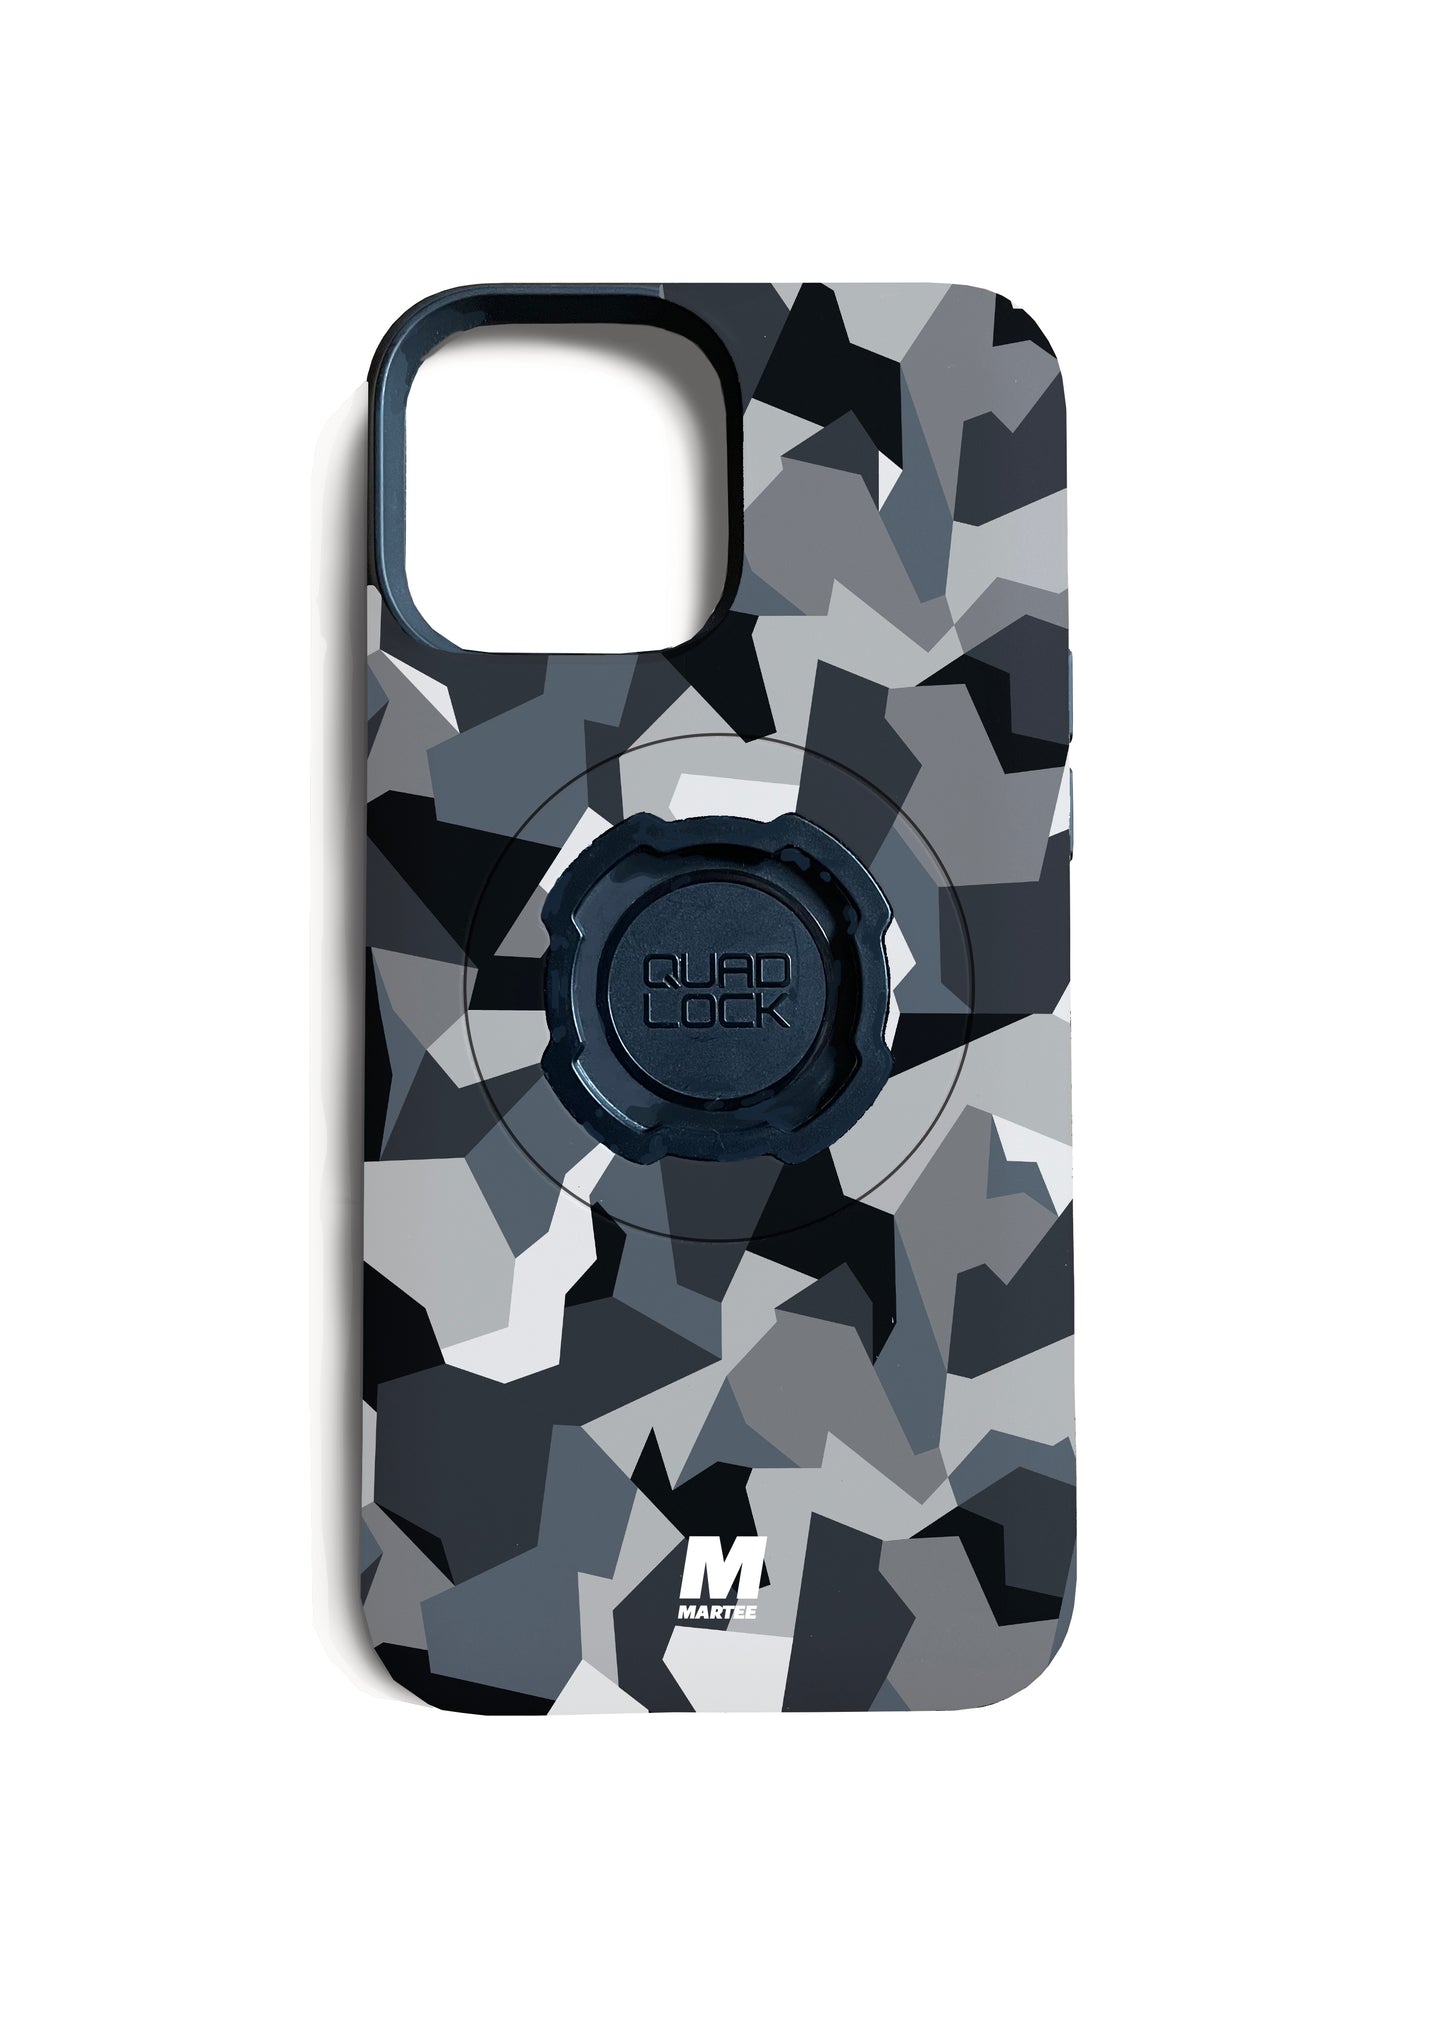 GREY CAMO COVER KIT FOR QUAD LOCK® MAGSAFE CASE